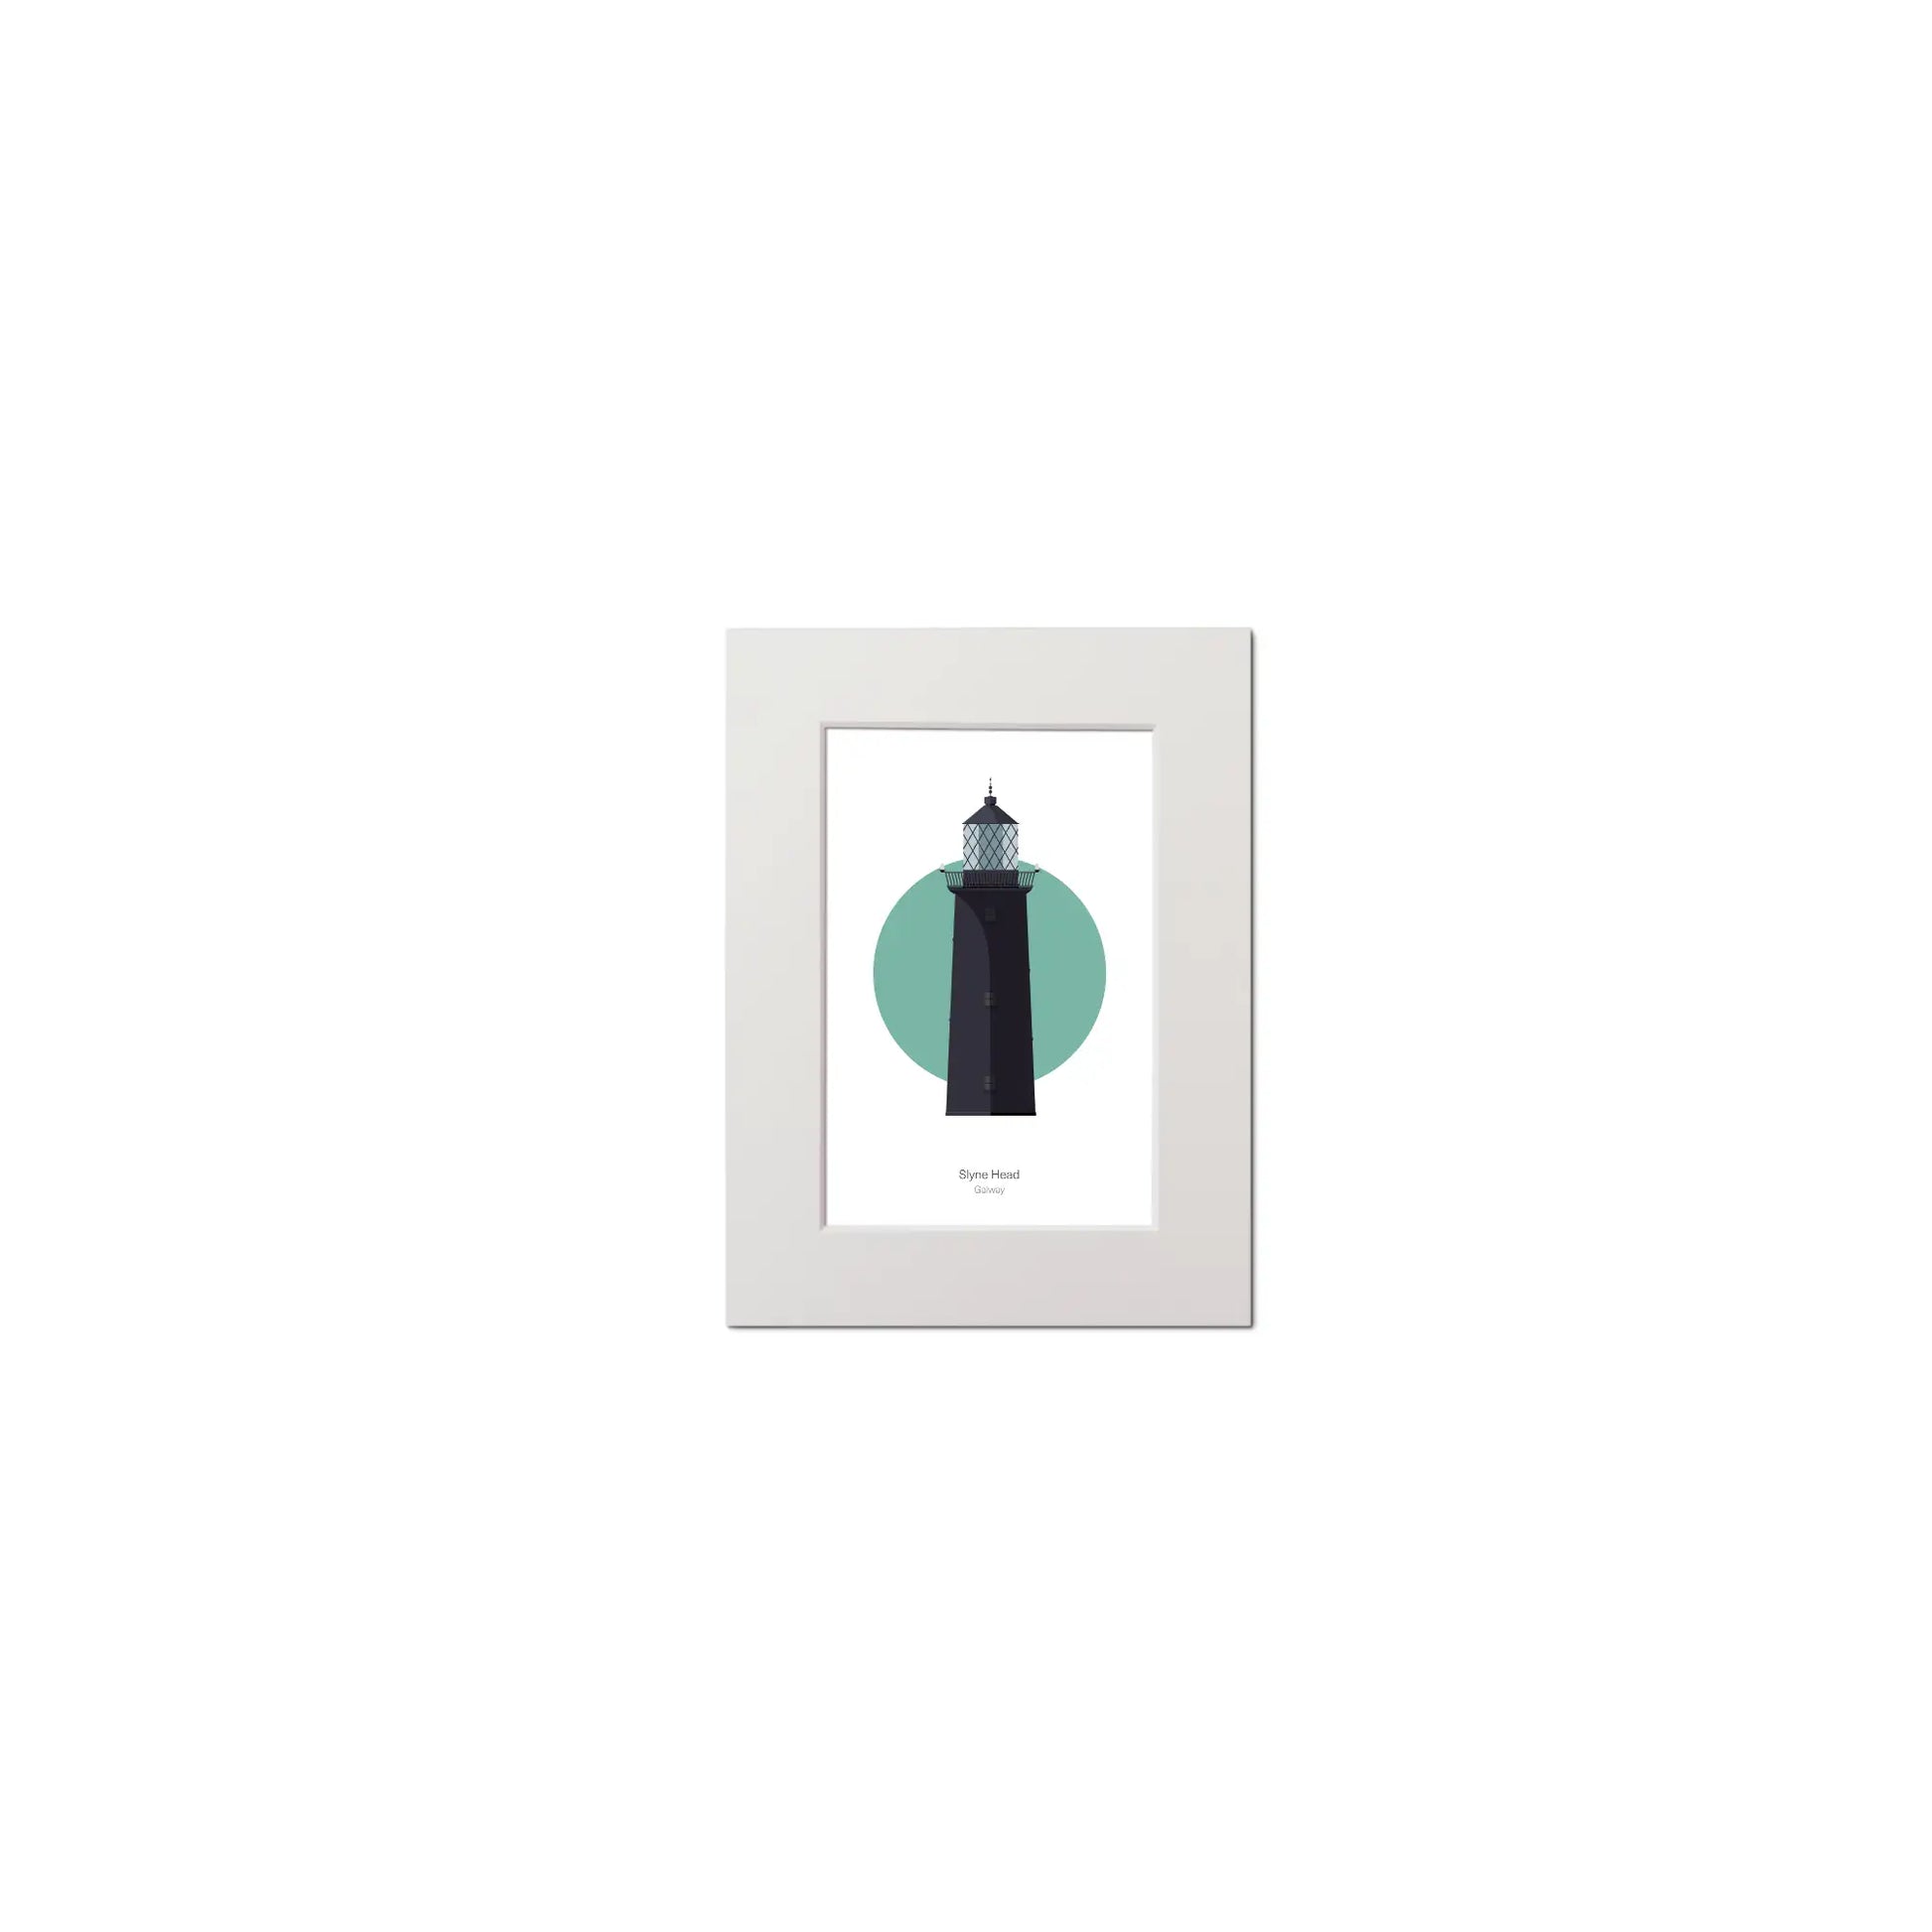 Illustration of Slyne_Head lighthouse on a white background inside light blue square, mounted and measuring 15x20cm.